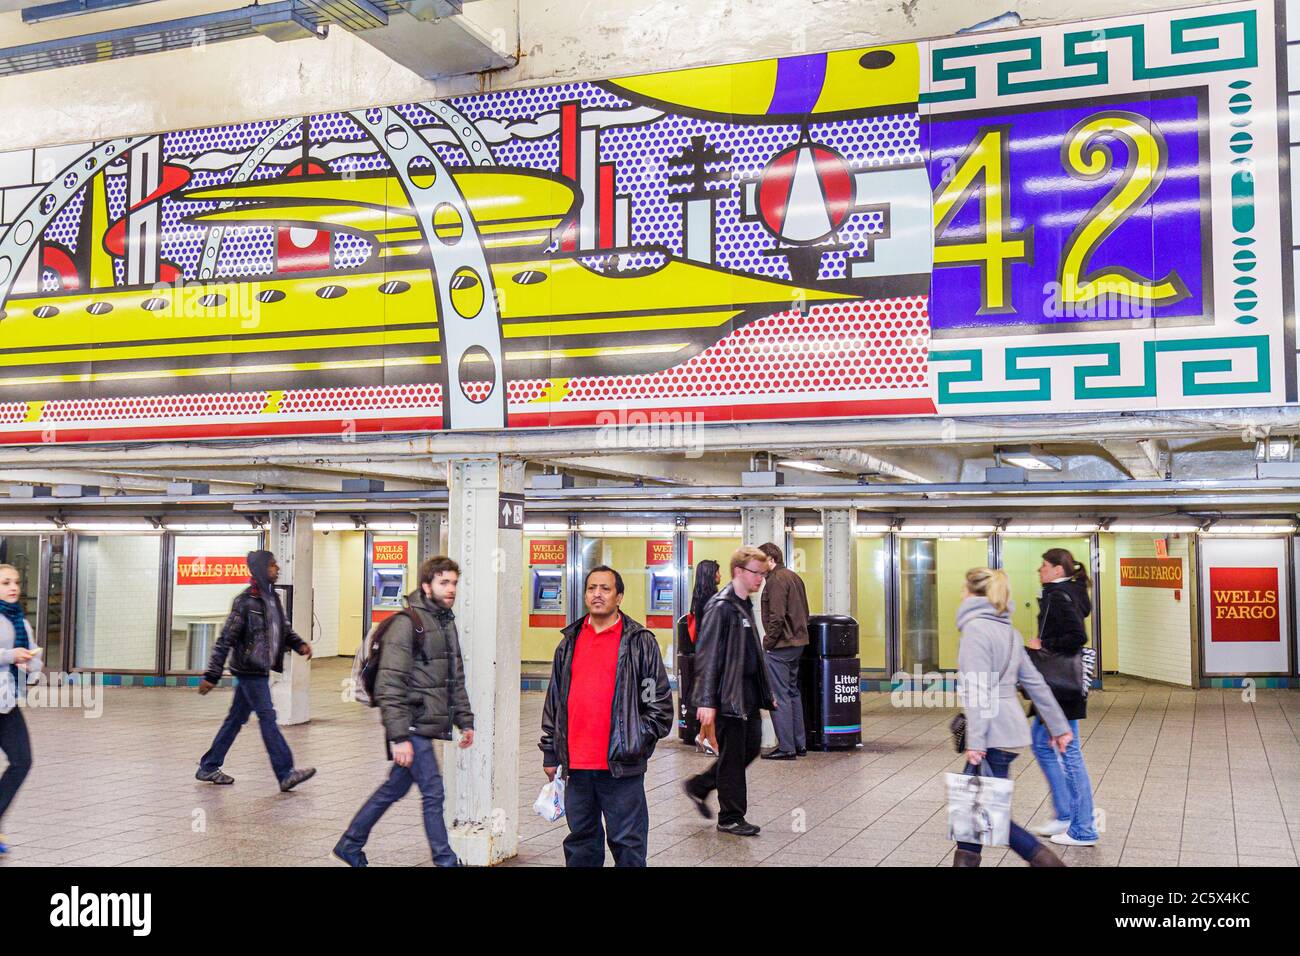 New York City,NYC NY Manhattan,Midtown,MTA,New York City,Subway system,Times Square Station,A C E S 1 2 3 7 highway Route,mural,public art,Roy Lichten Stock Photo